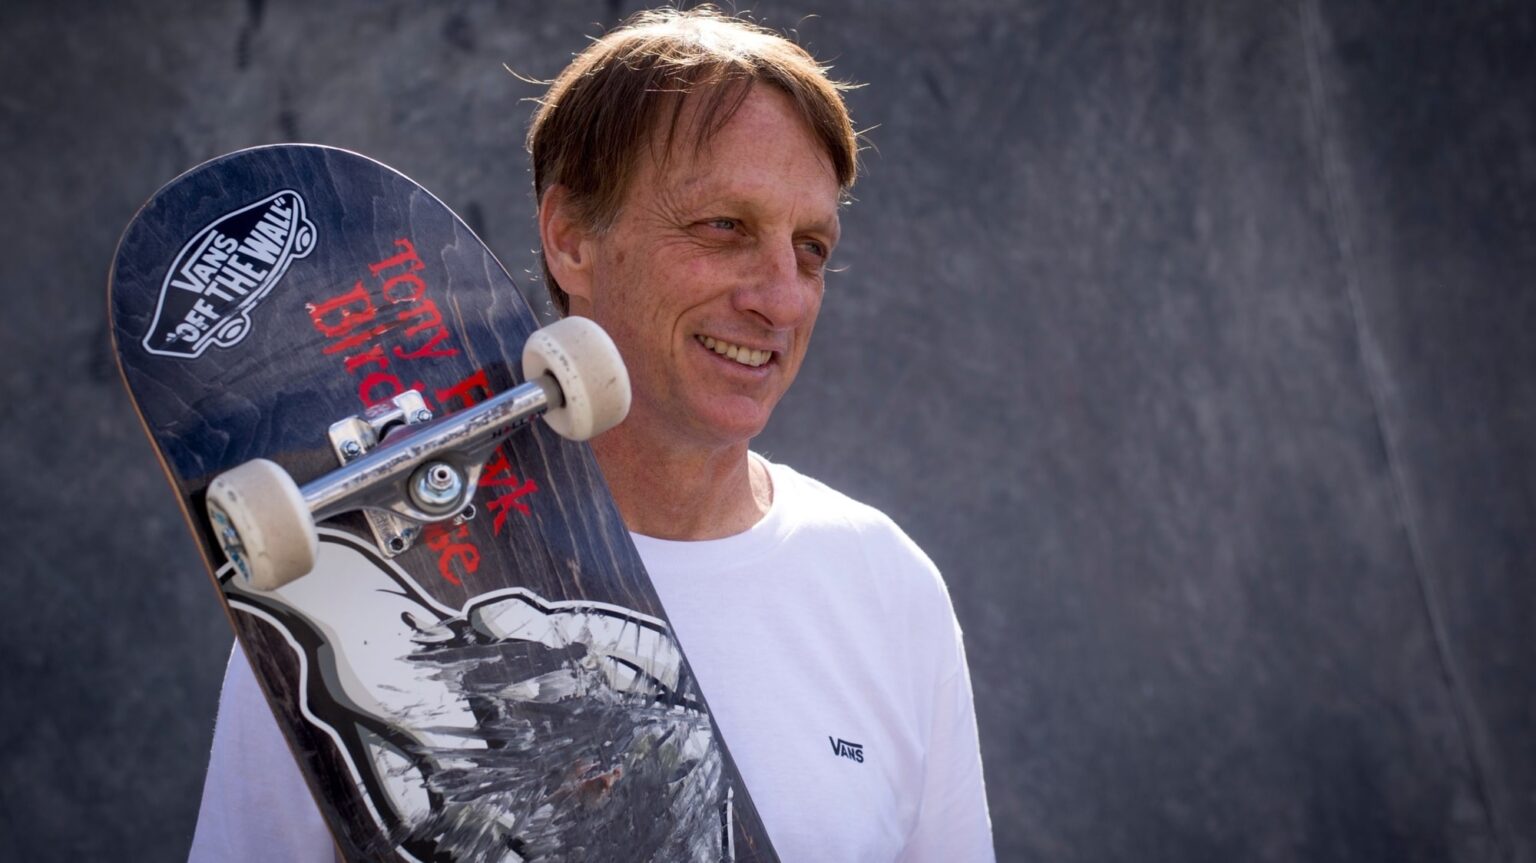 If you haven’t heard of Tony Hawk’s games (and I bet you have), you’d have seen him in dozens of other ways. What's his latest venture on Twitter?